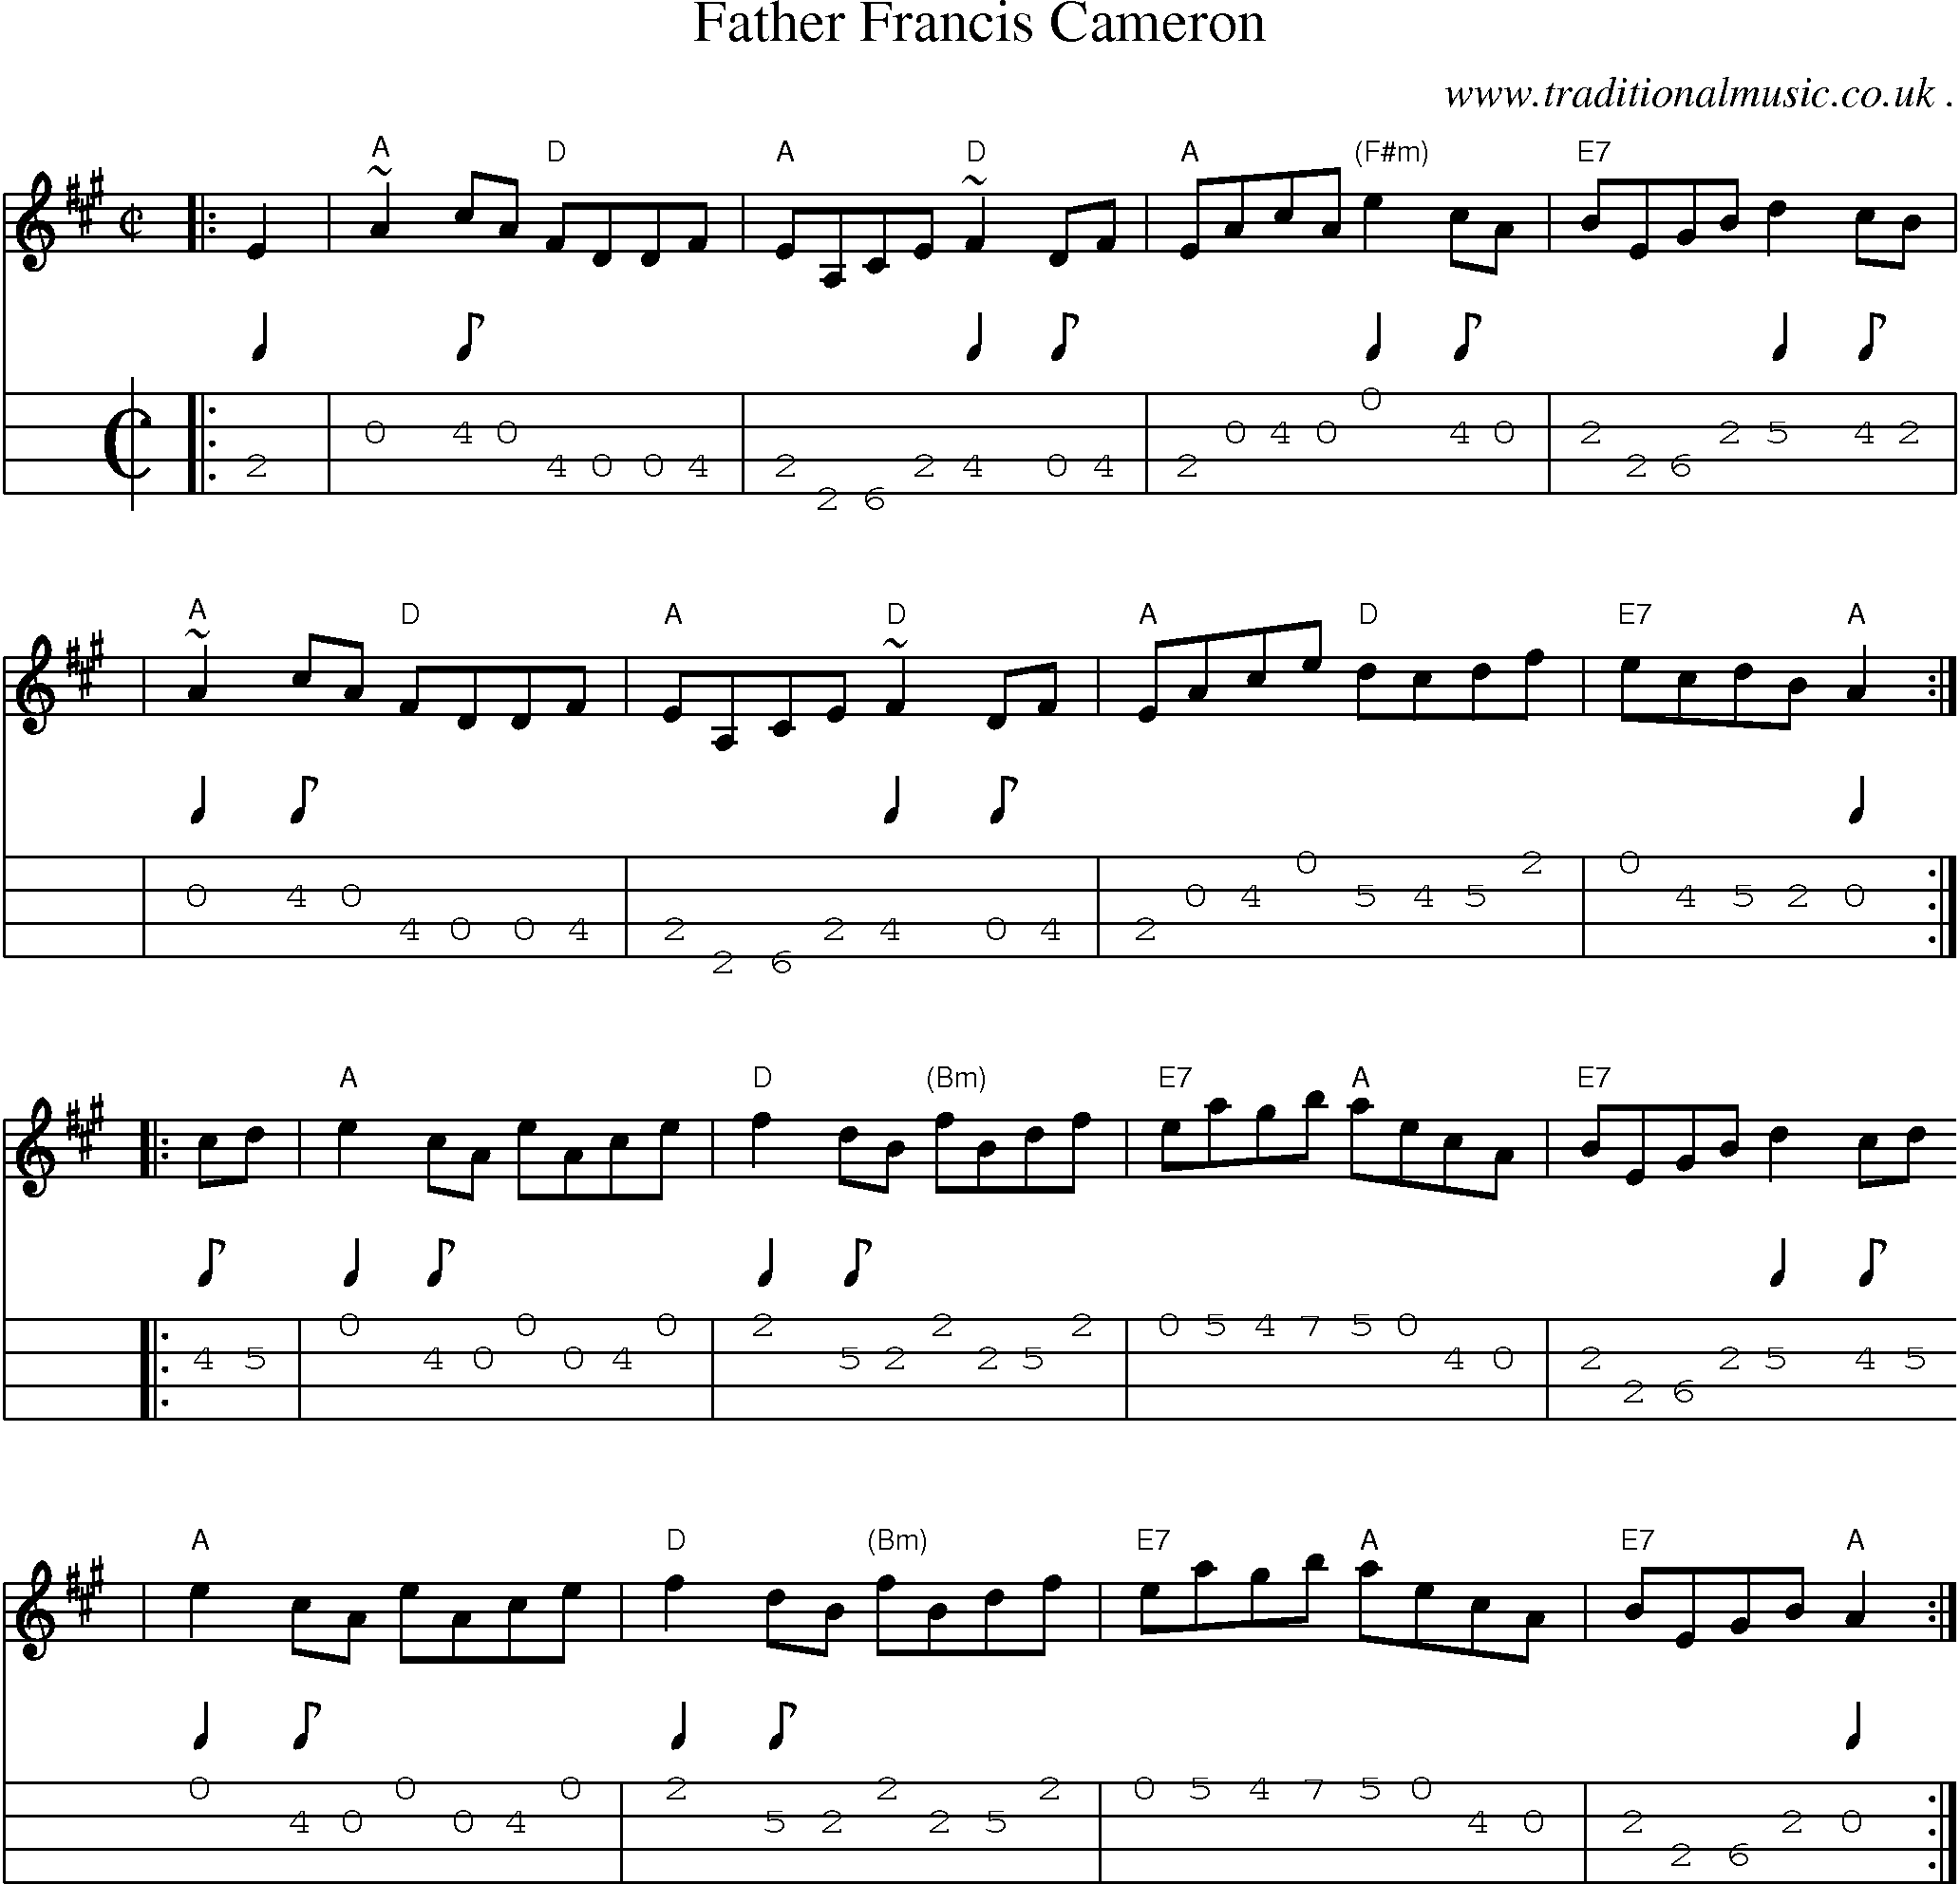 Sheet-music  score, Chords and Mandolin Tabs for Father Francis Cameron